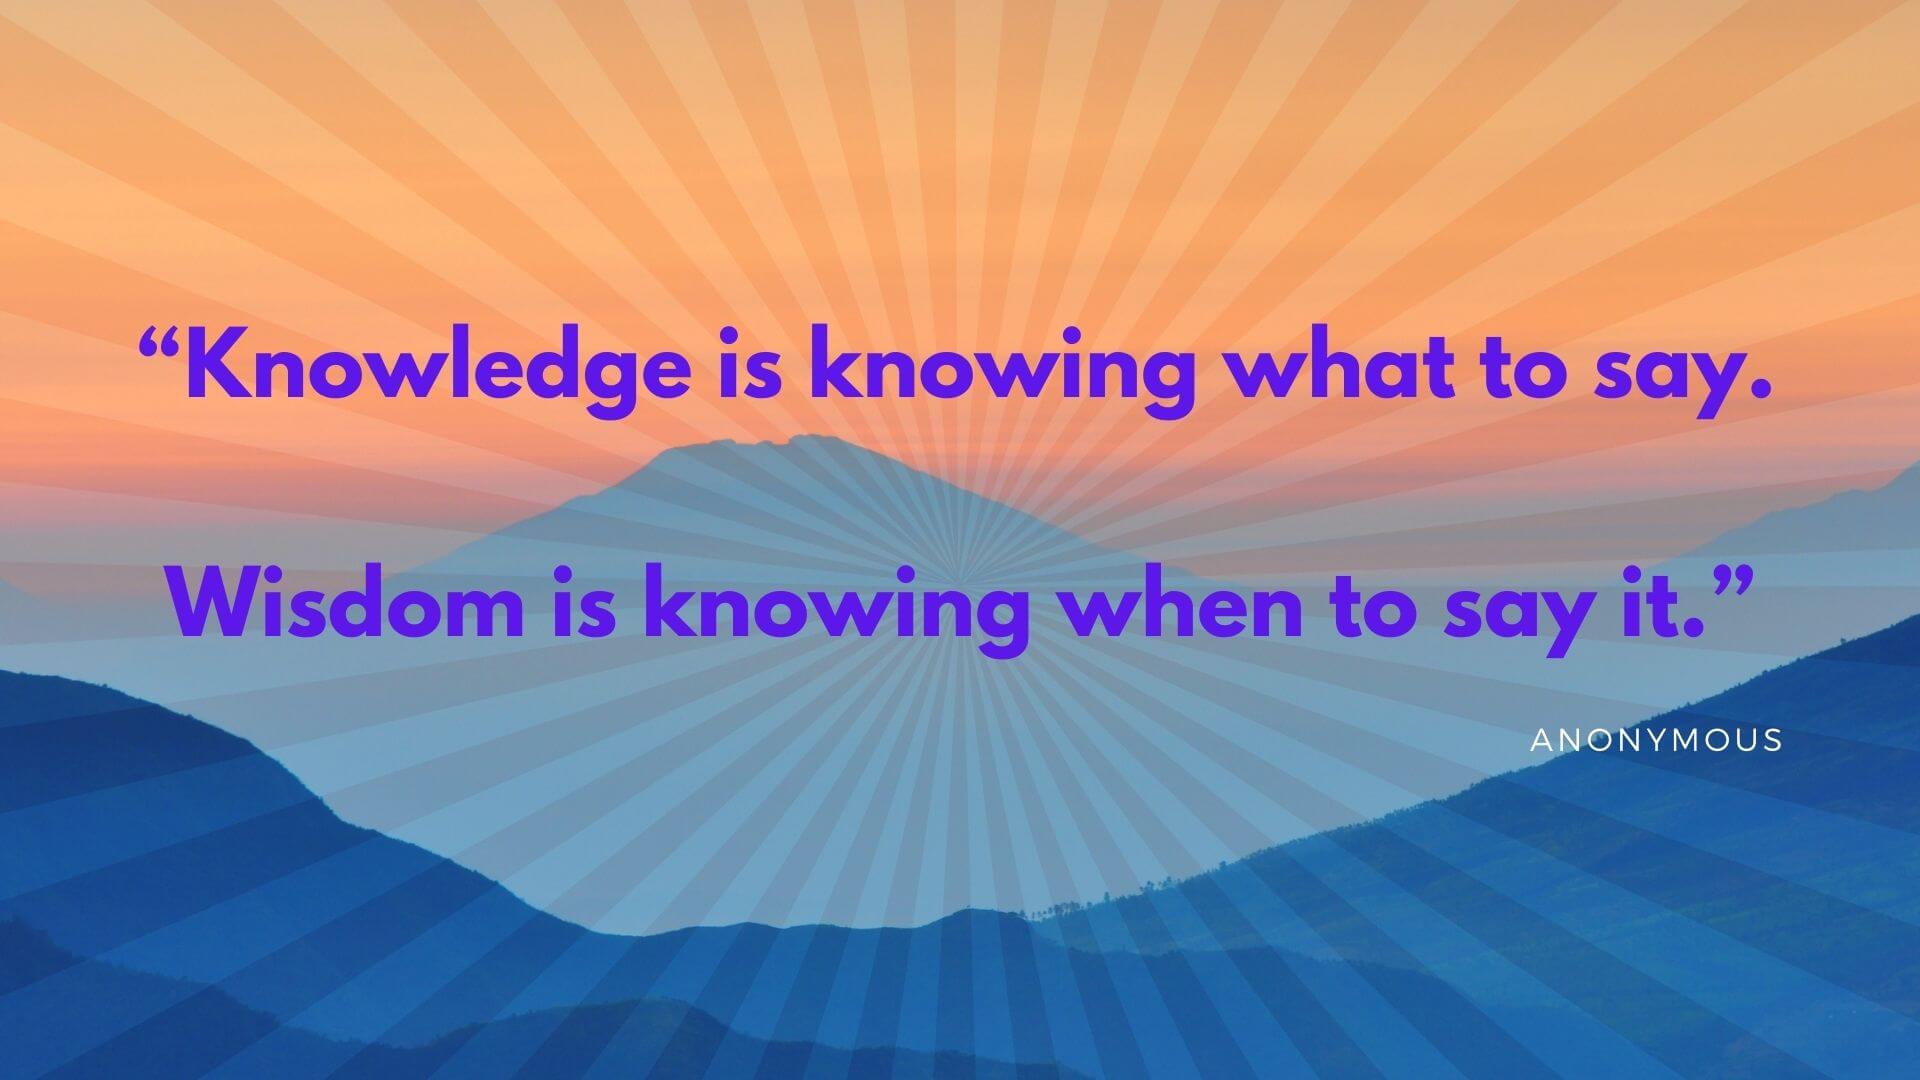 How wisdom makes you to use knowledge